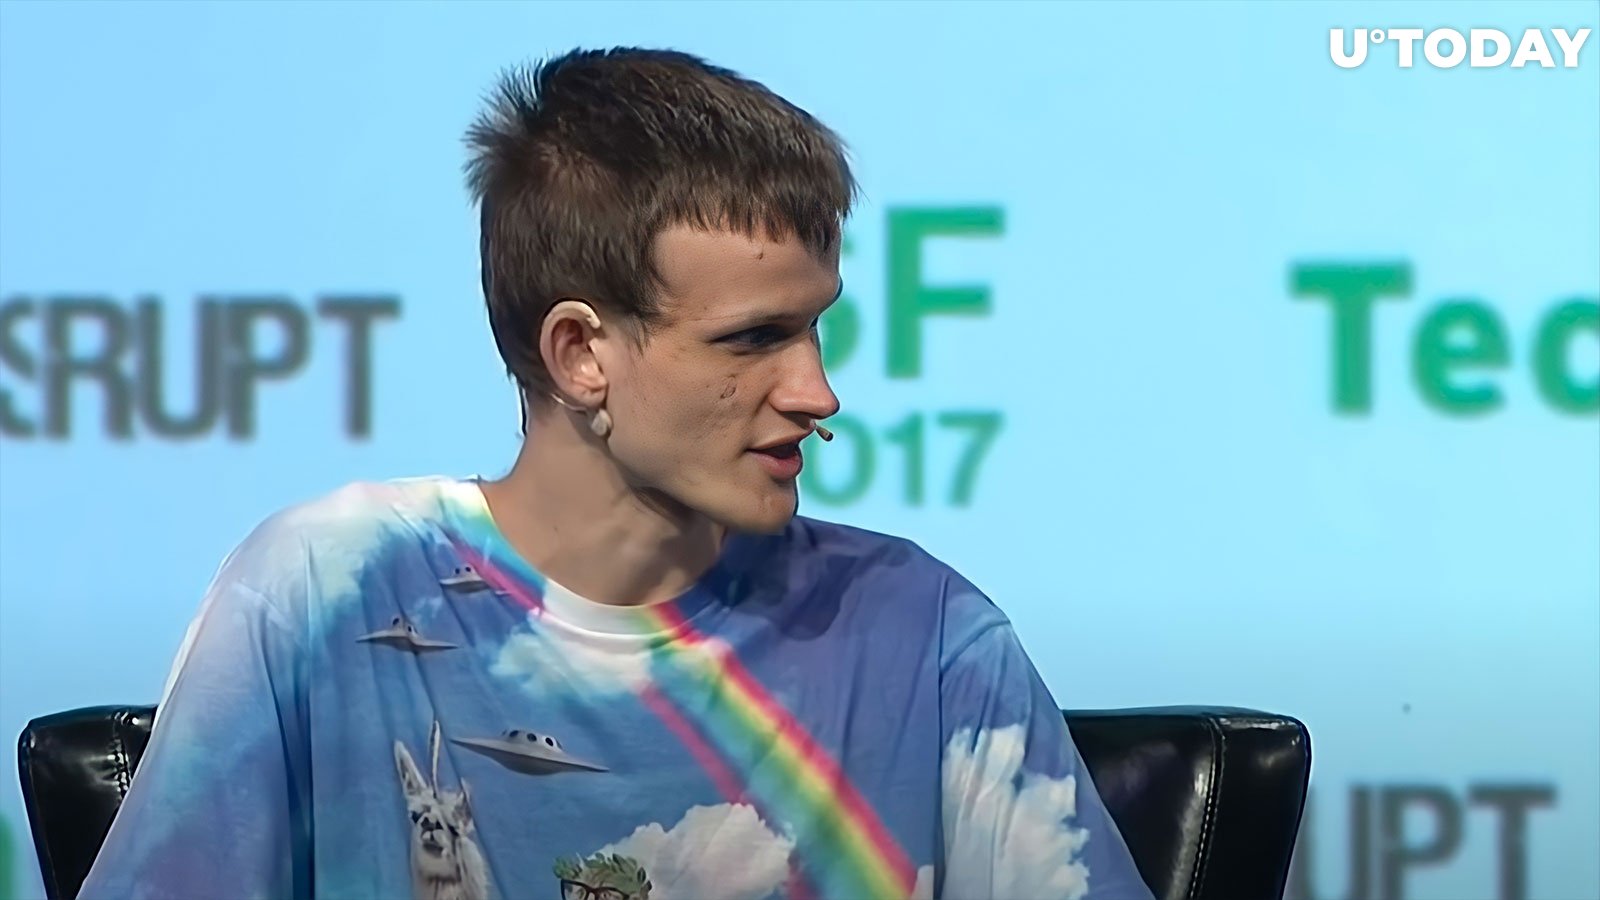 Ethereum's Vitalik Buterin: "Something Important Is About to Happen"